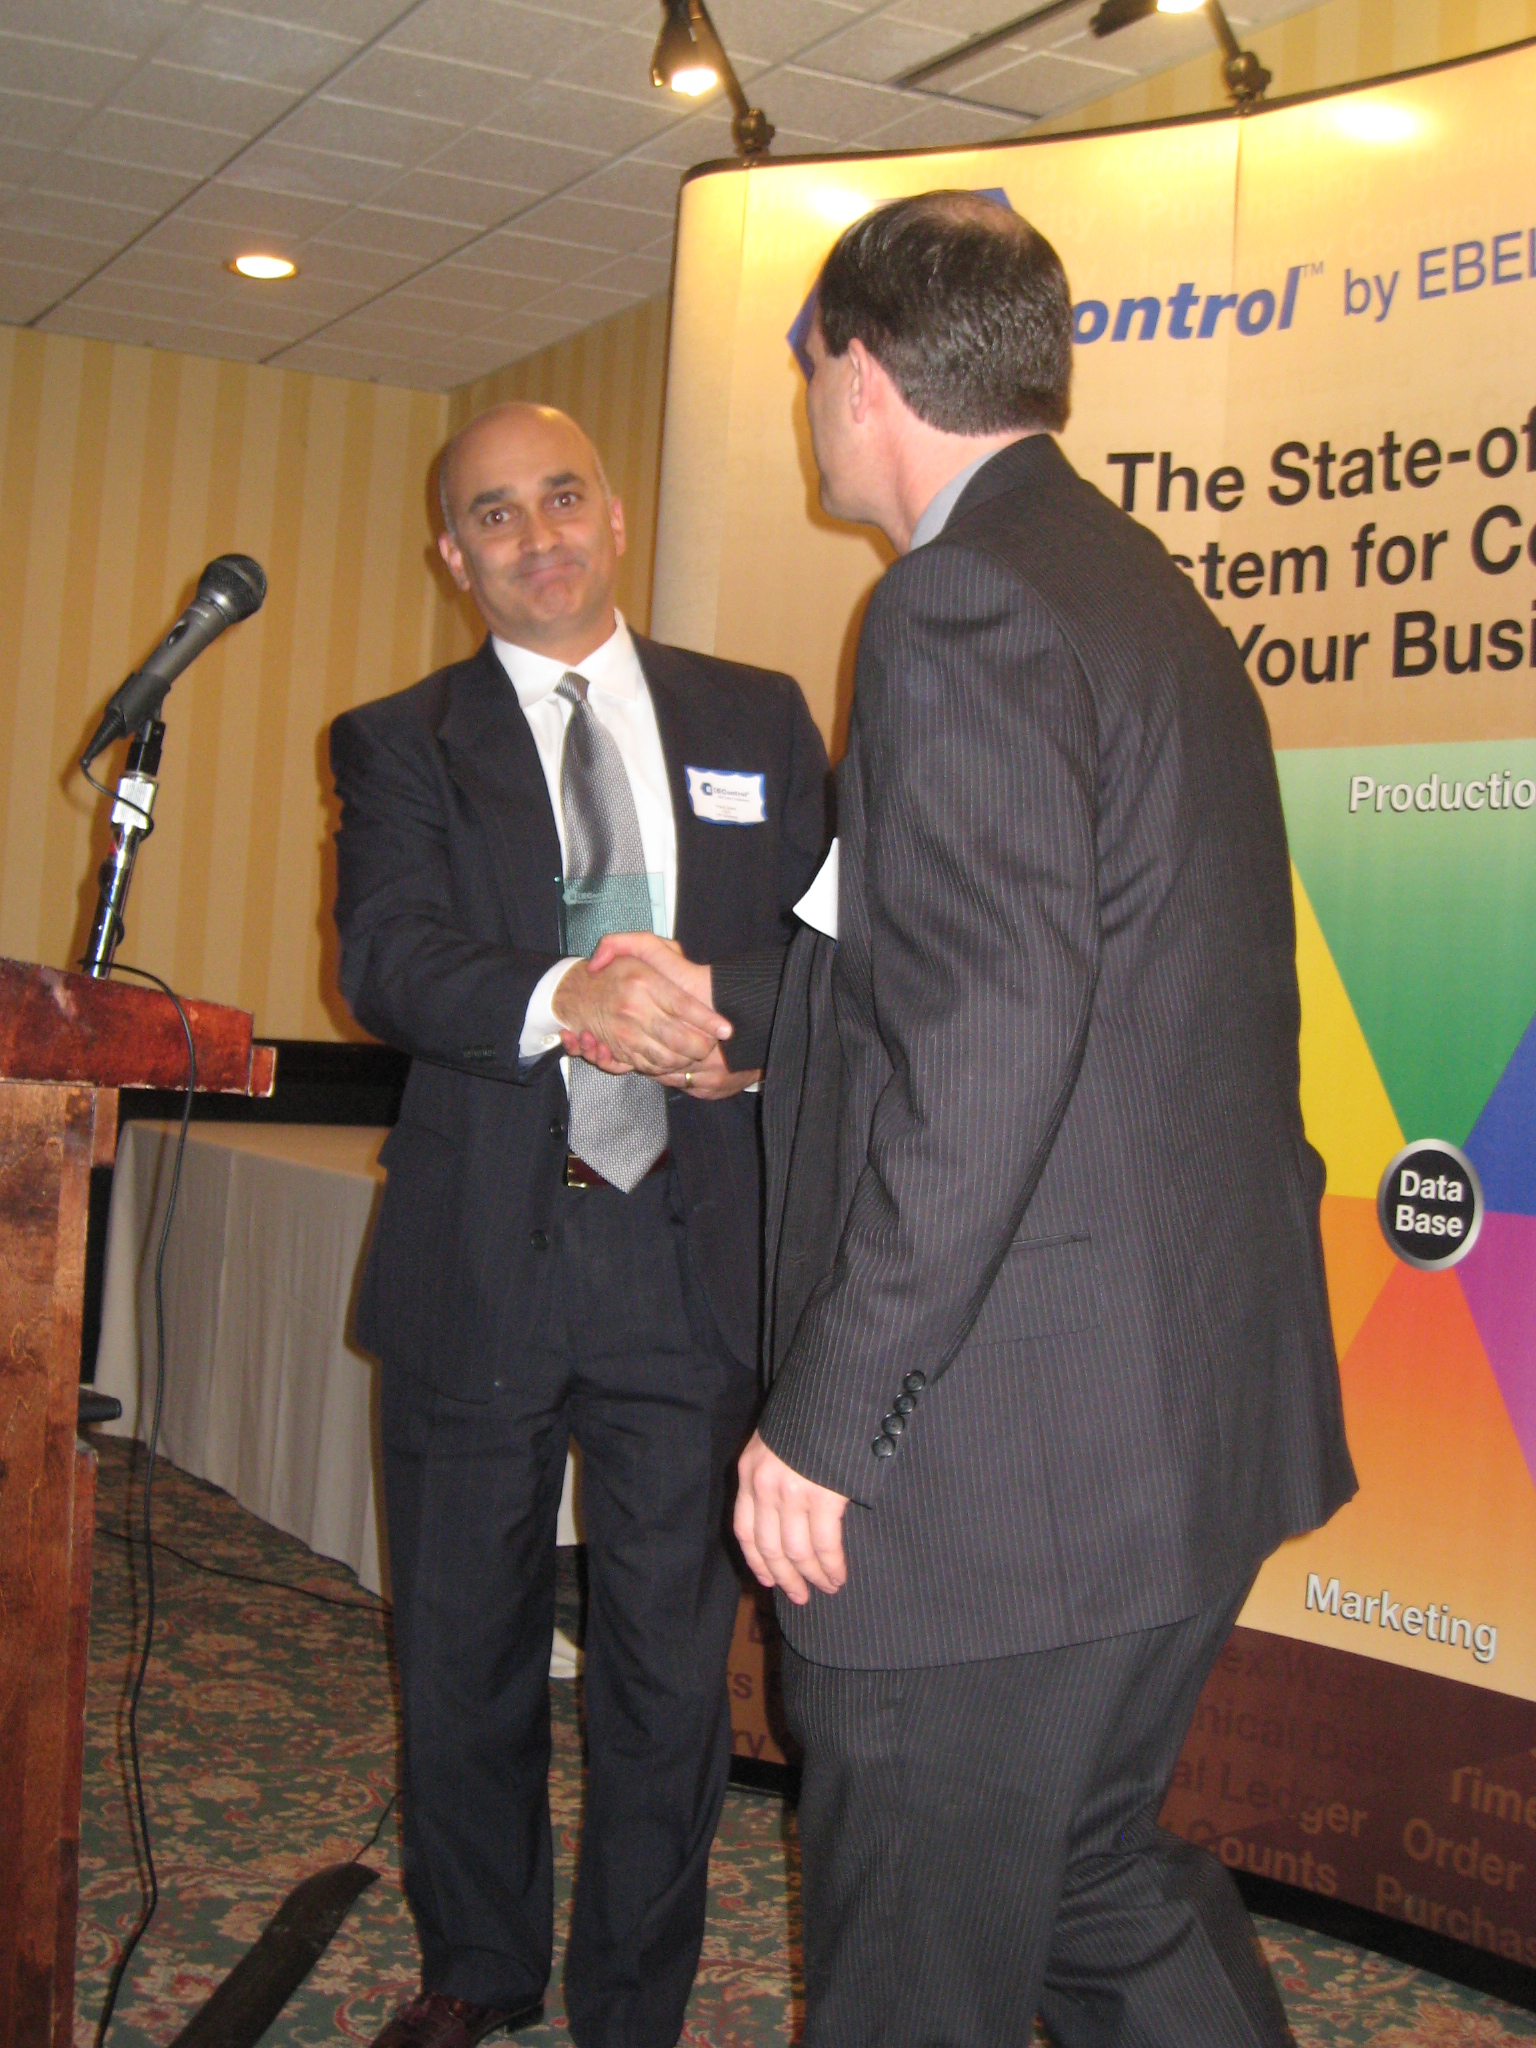 Shaking hands at the 2009 User Conference